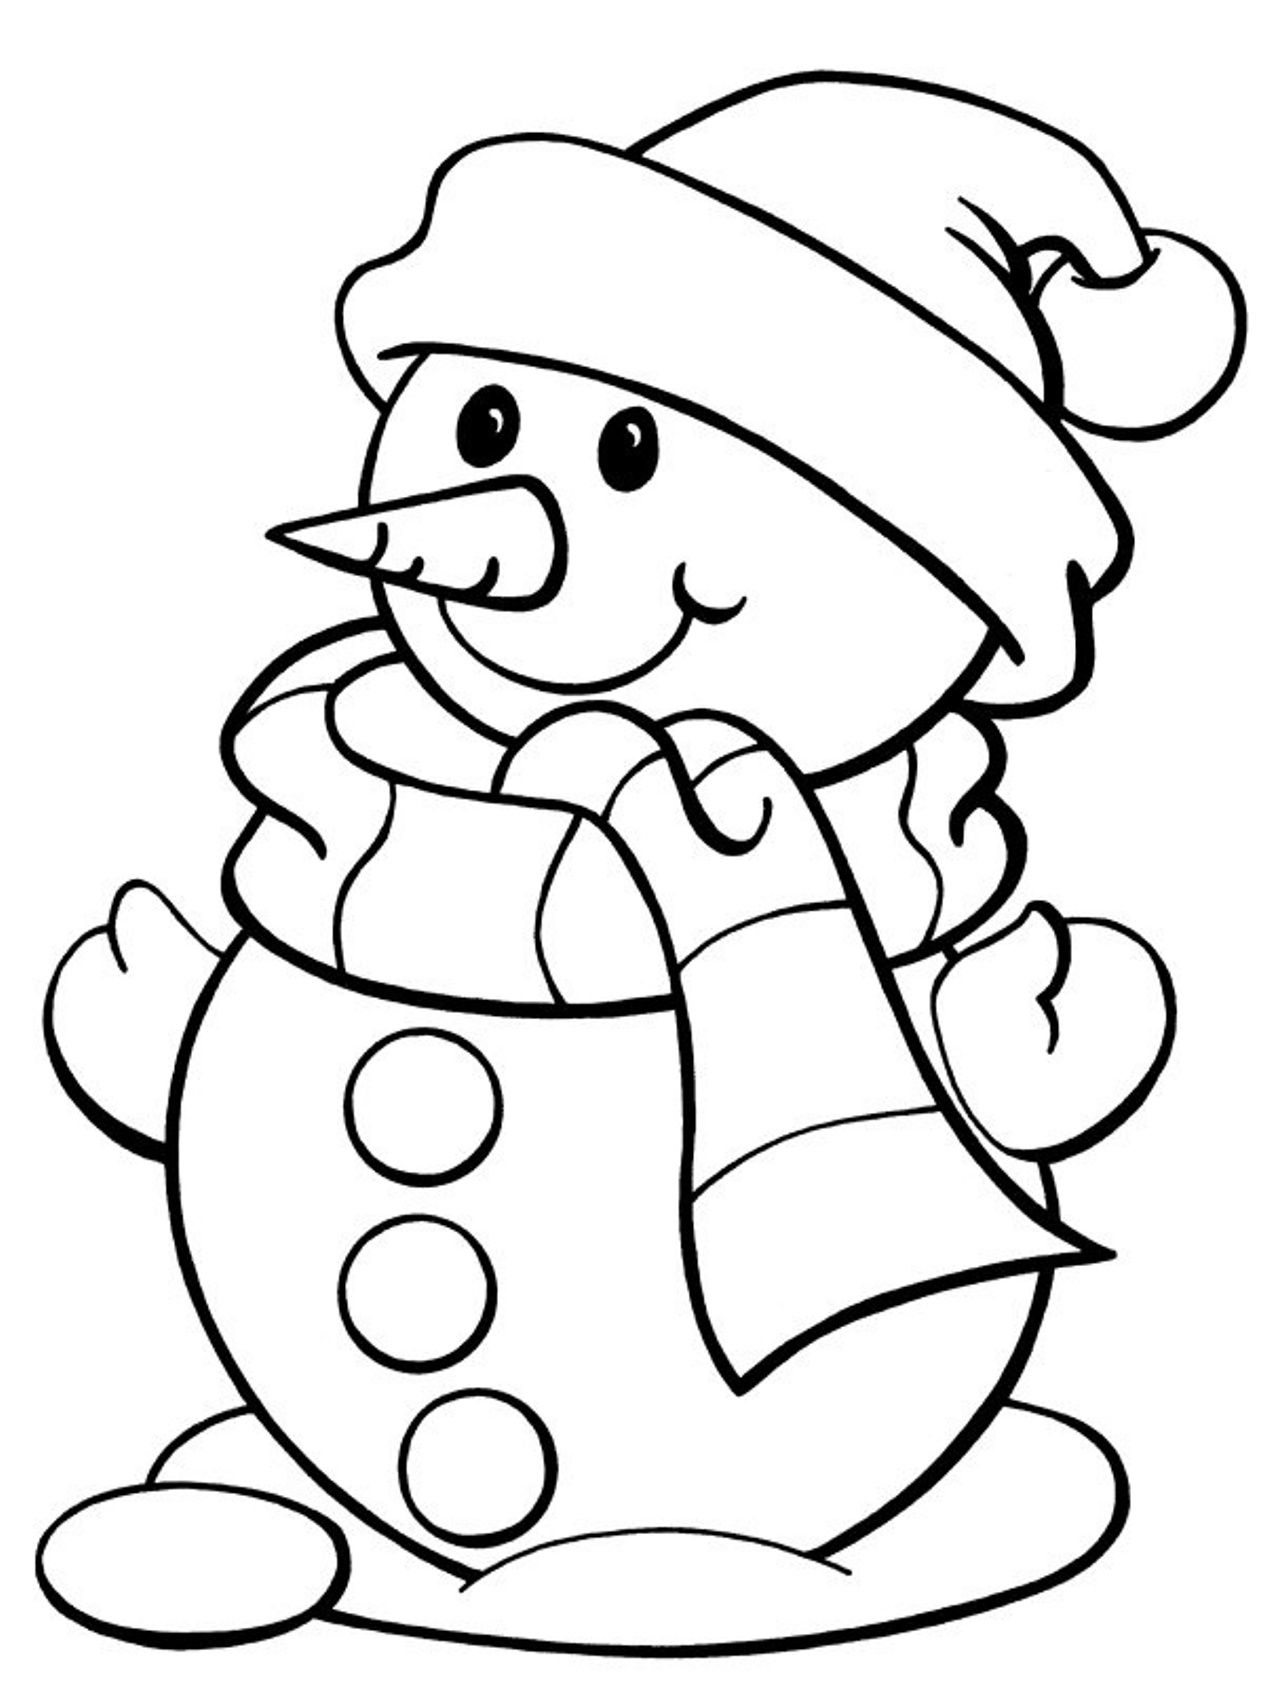 Winter Coloring Pages - Free printable Coloring pages for kids